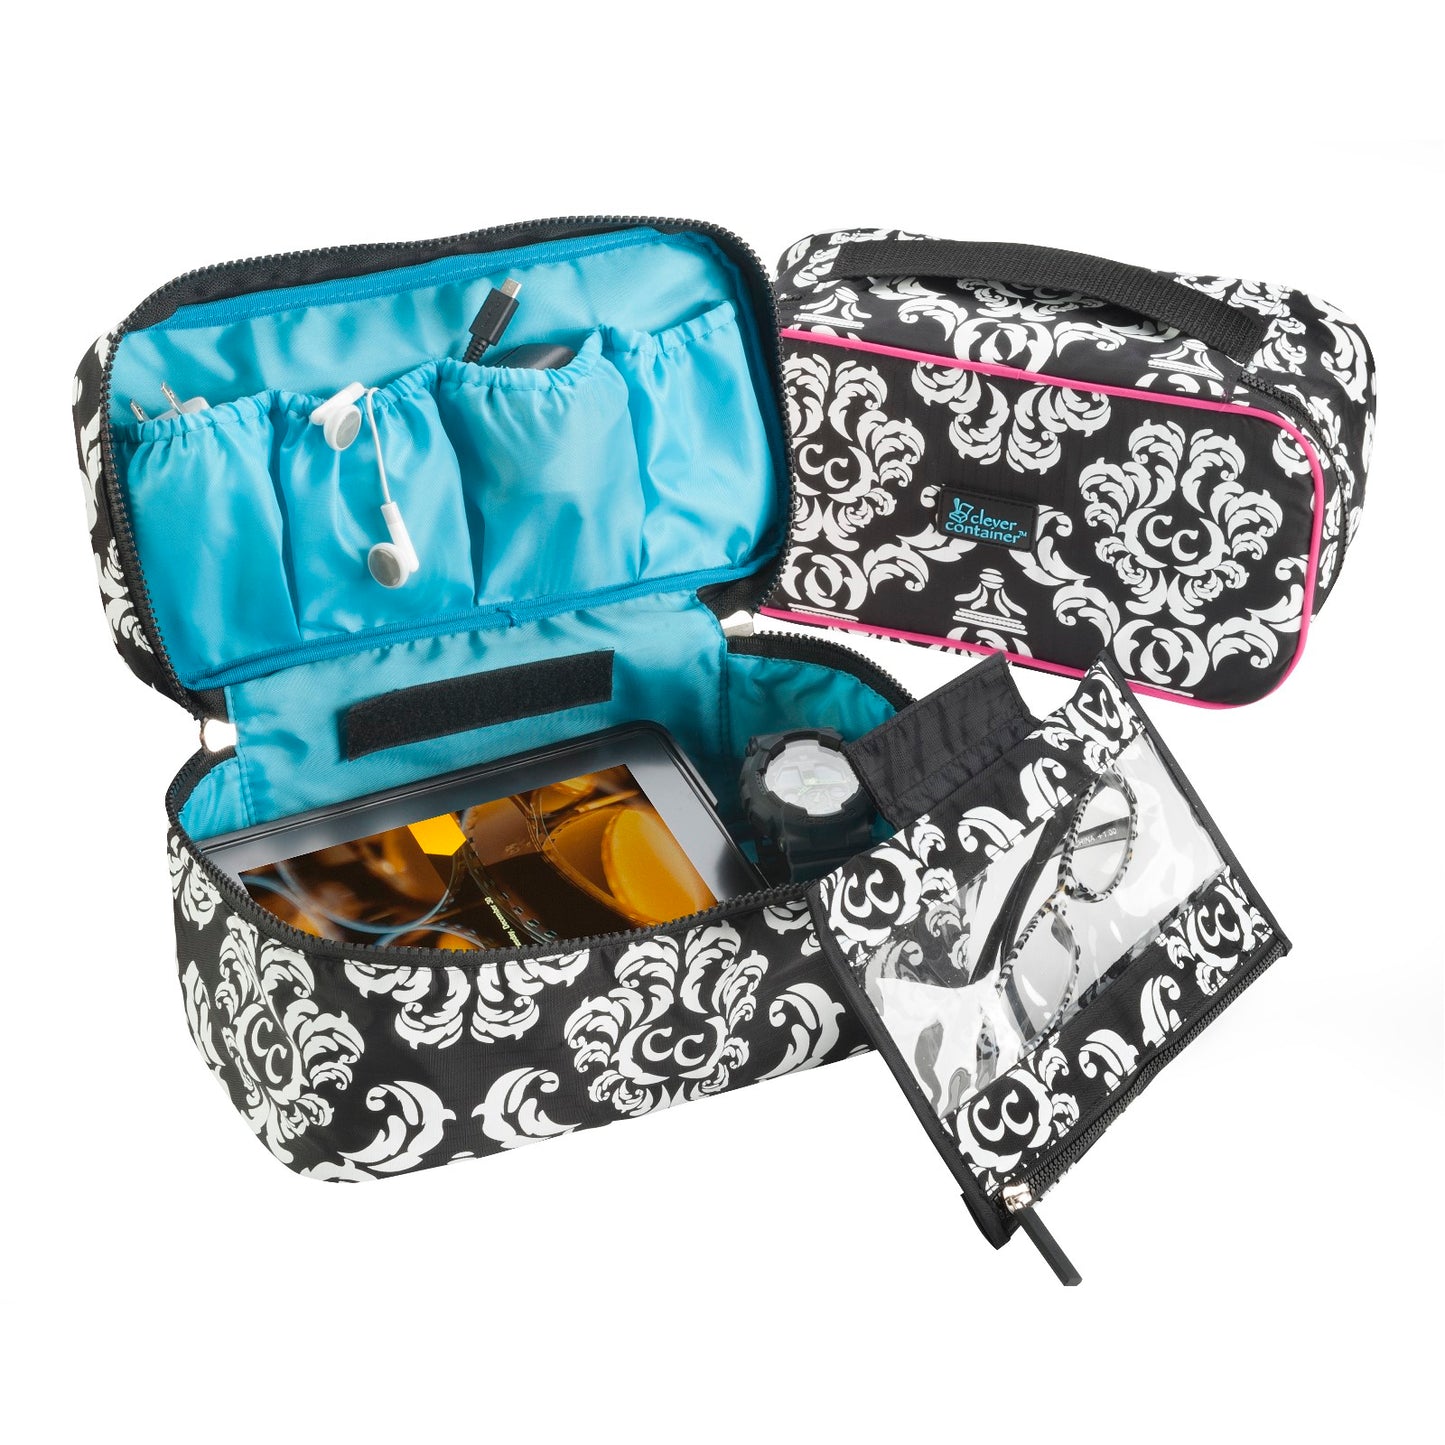 Tech & Toiletries Pouch - Damask with Teal